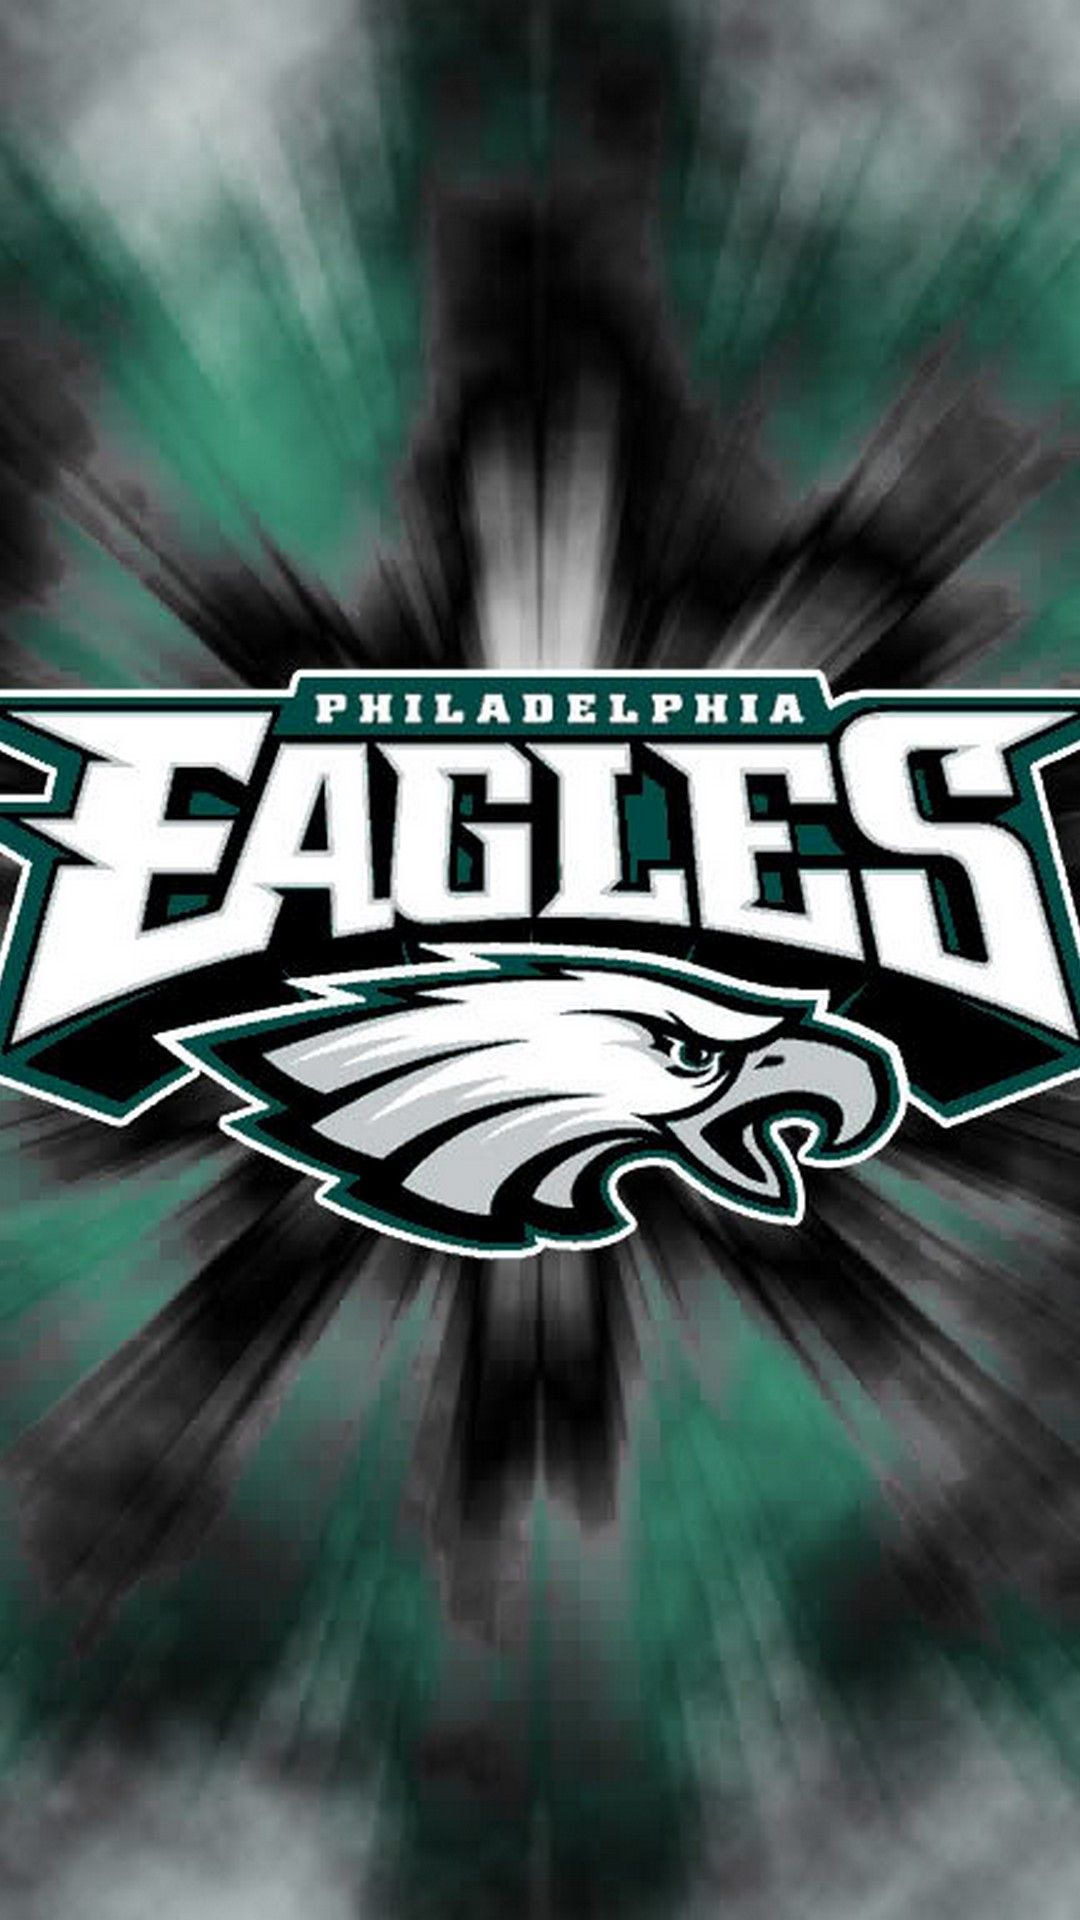 1080x1920 The Eagles HD Wallpaper For iPhone 2022 NFL Football Wallpapers | Philadelphia eagles wallpaper, Philadelphia eagles logo, Eagles